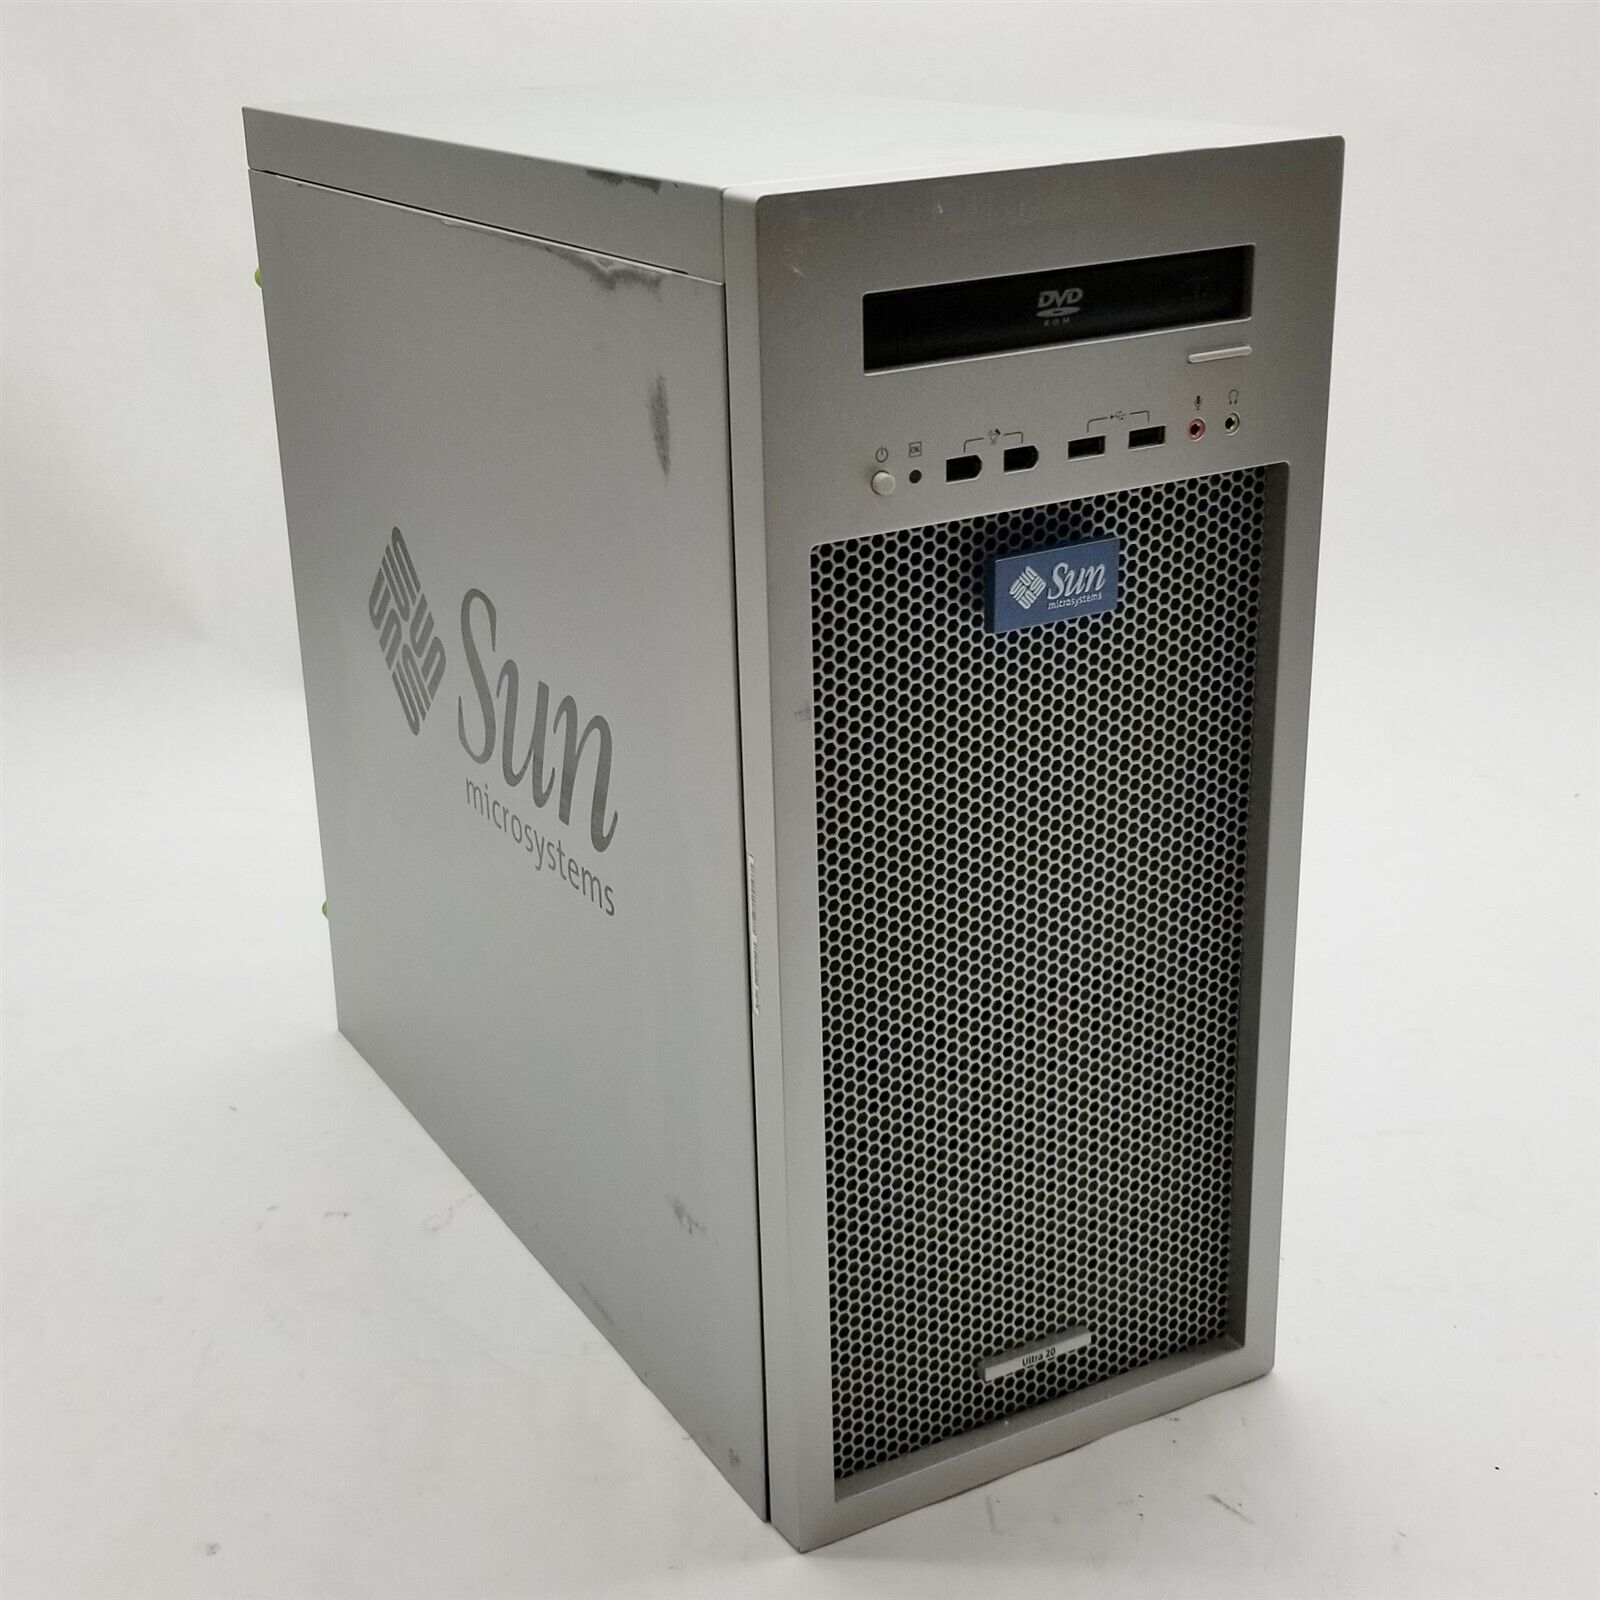 Sun Microsystems Ultra 20 Workstation Opteron 148 2.2GHz 2GB RAM *No HDD* Server